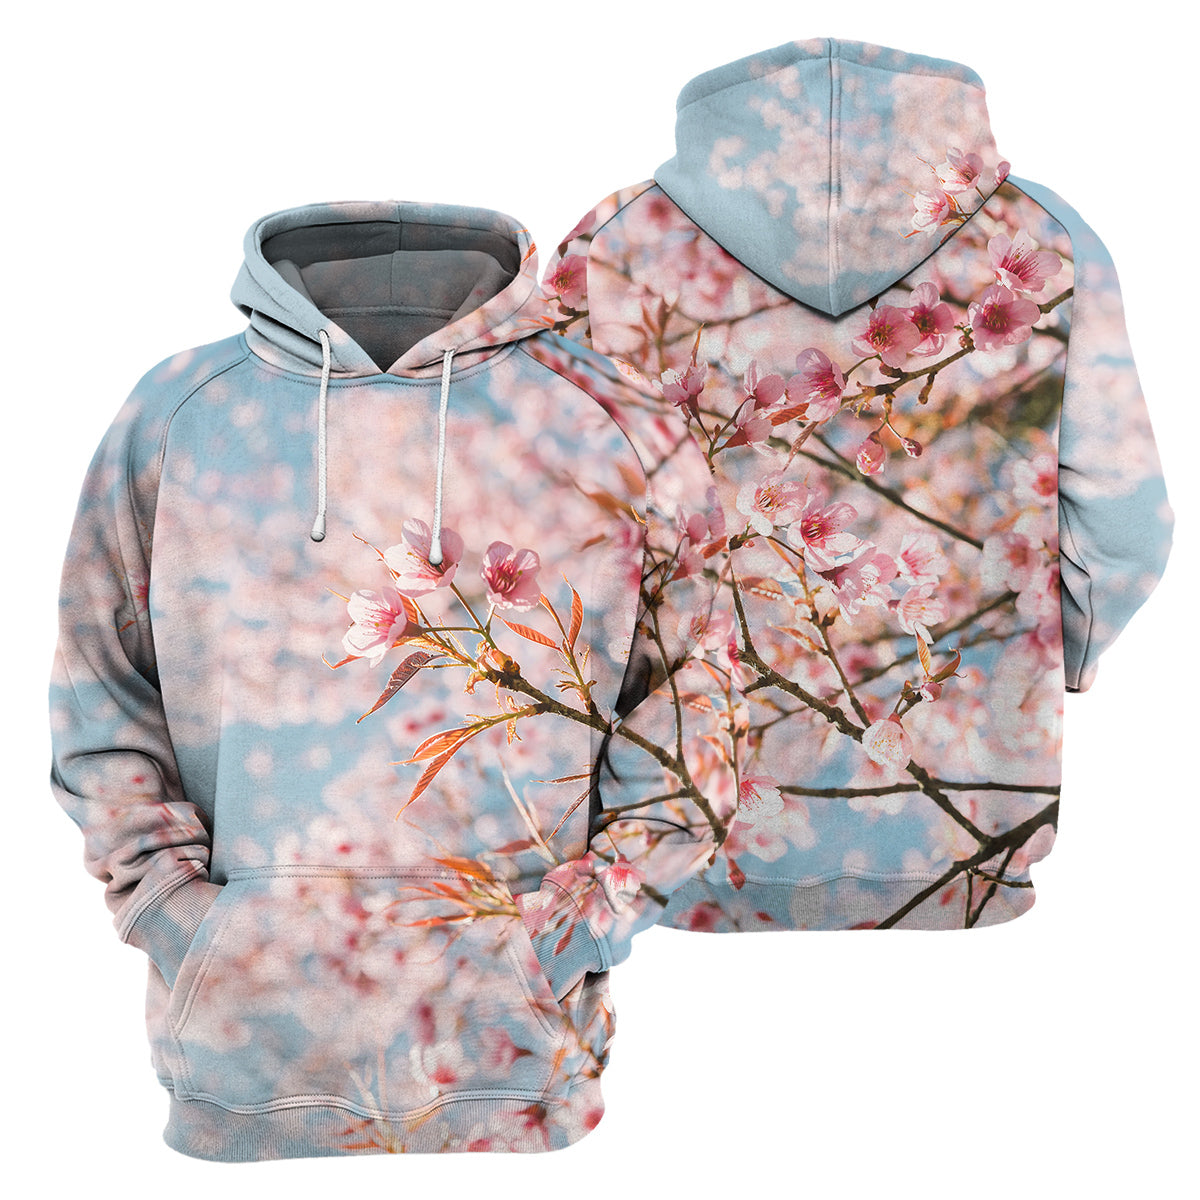 Gearhumans Cherry Blossom - 3D All Over Printed Shirt